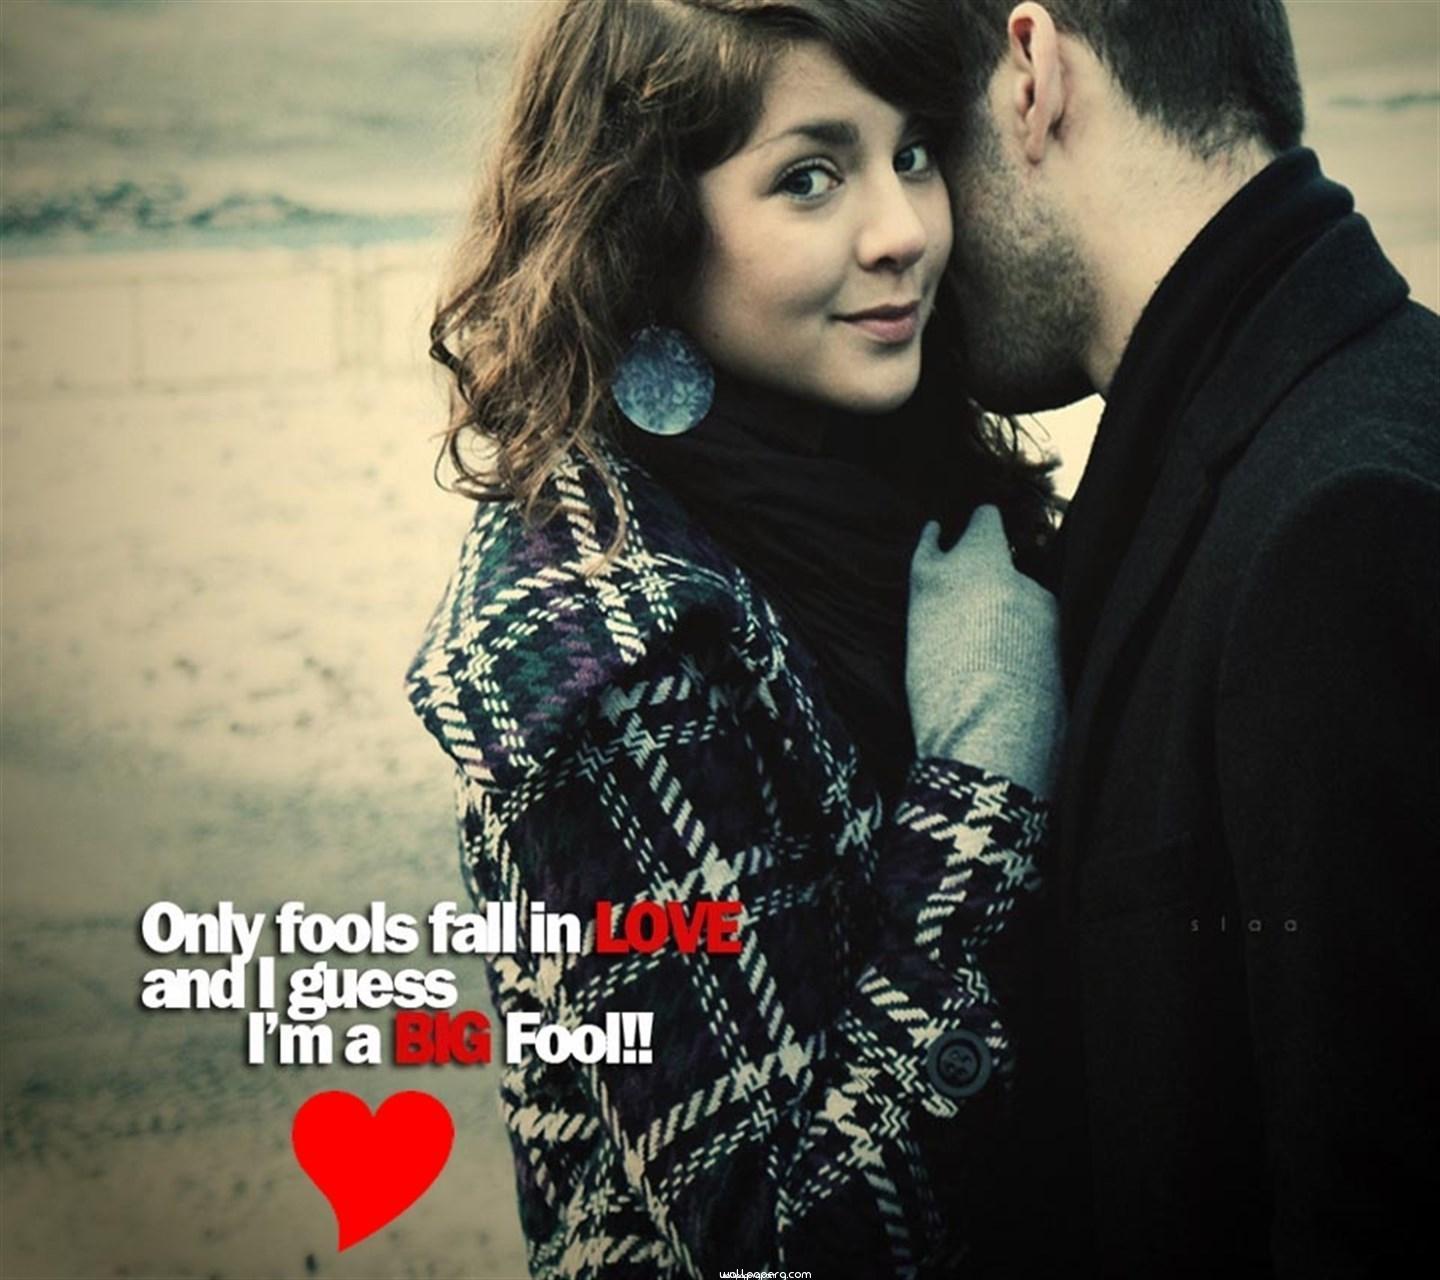 Download Fall In Love Hd Wallpaper For Mobile Romantic Wallpapers For Your Mobile Cell Phone